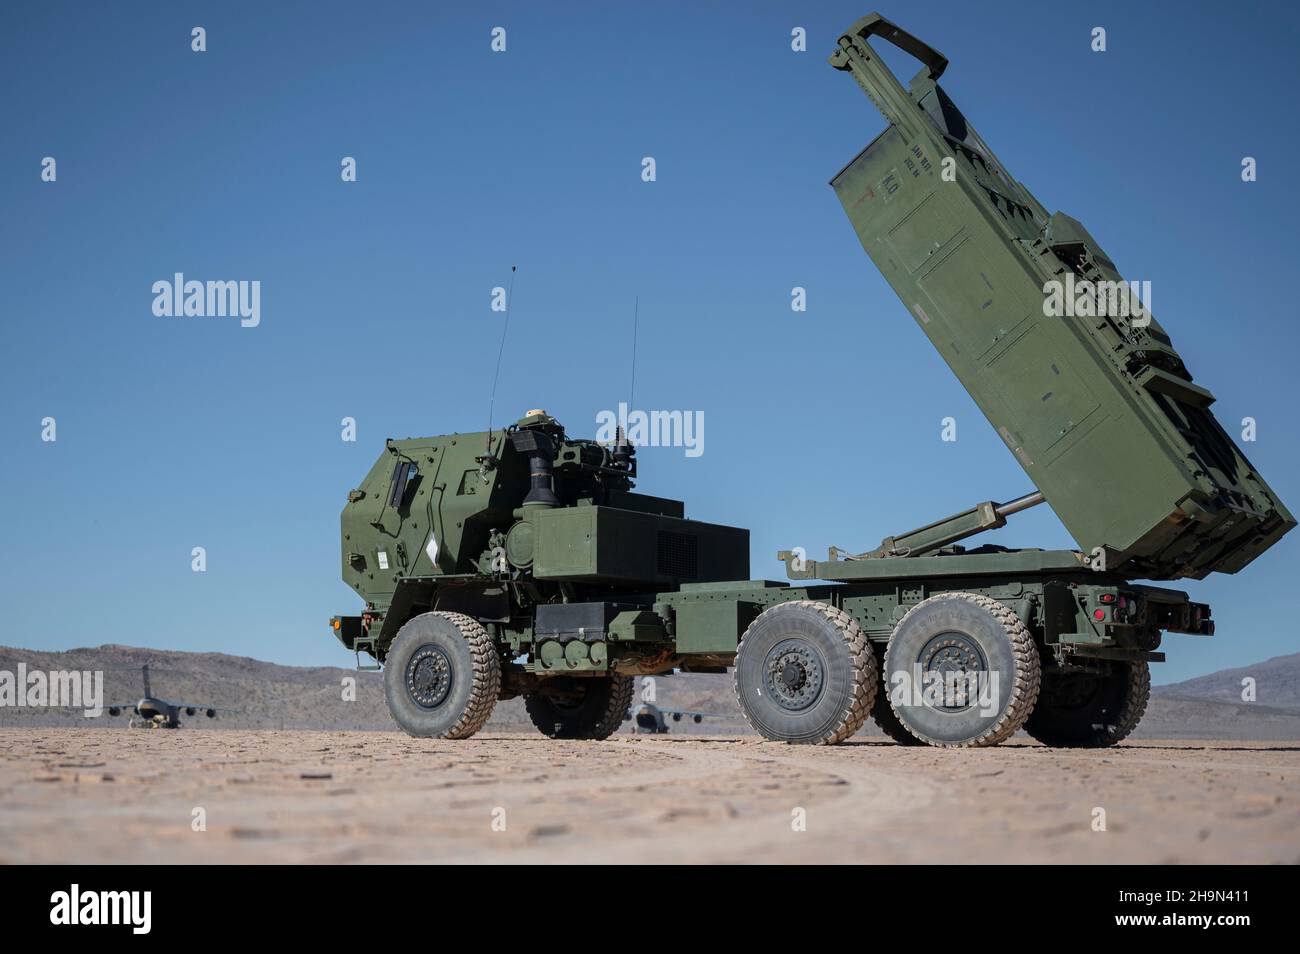 An M142 High Mobility Artillery Rocket System (HIMARS) assigned to the 3rd Battalion, 321st Field Artillery Regiment, Fort Bragg, North Carolina, simulates launching artillery during U.S. Air Force Weapons School Integration held at Nellis Air Force Base, Nevada, Dec. 4, 2021. The 6th Airlift Squadron staged at Nellis AFB to load HIMARS’s as part of the Joint Forcible Entry 21B exercise. (U.S. Air Force photo by Airman 1st Class Zachary Rufus) Stock Photo